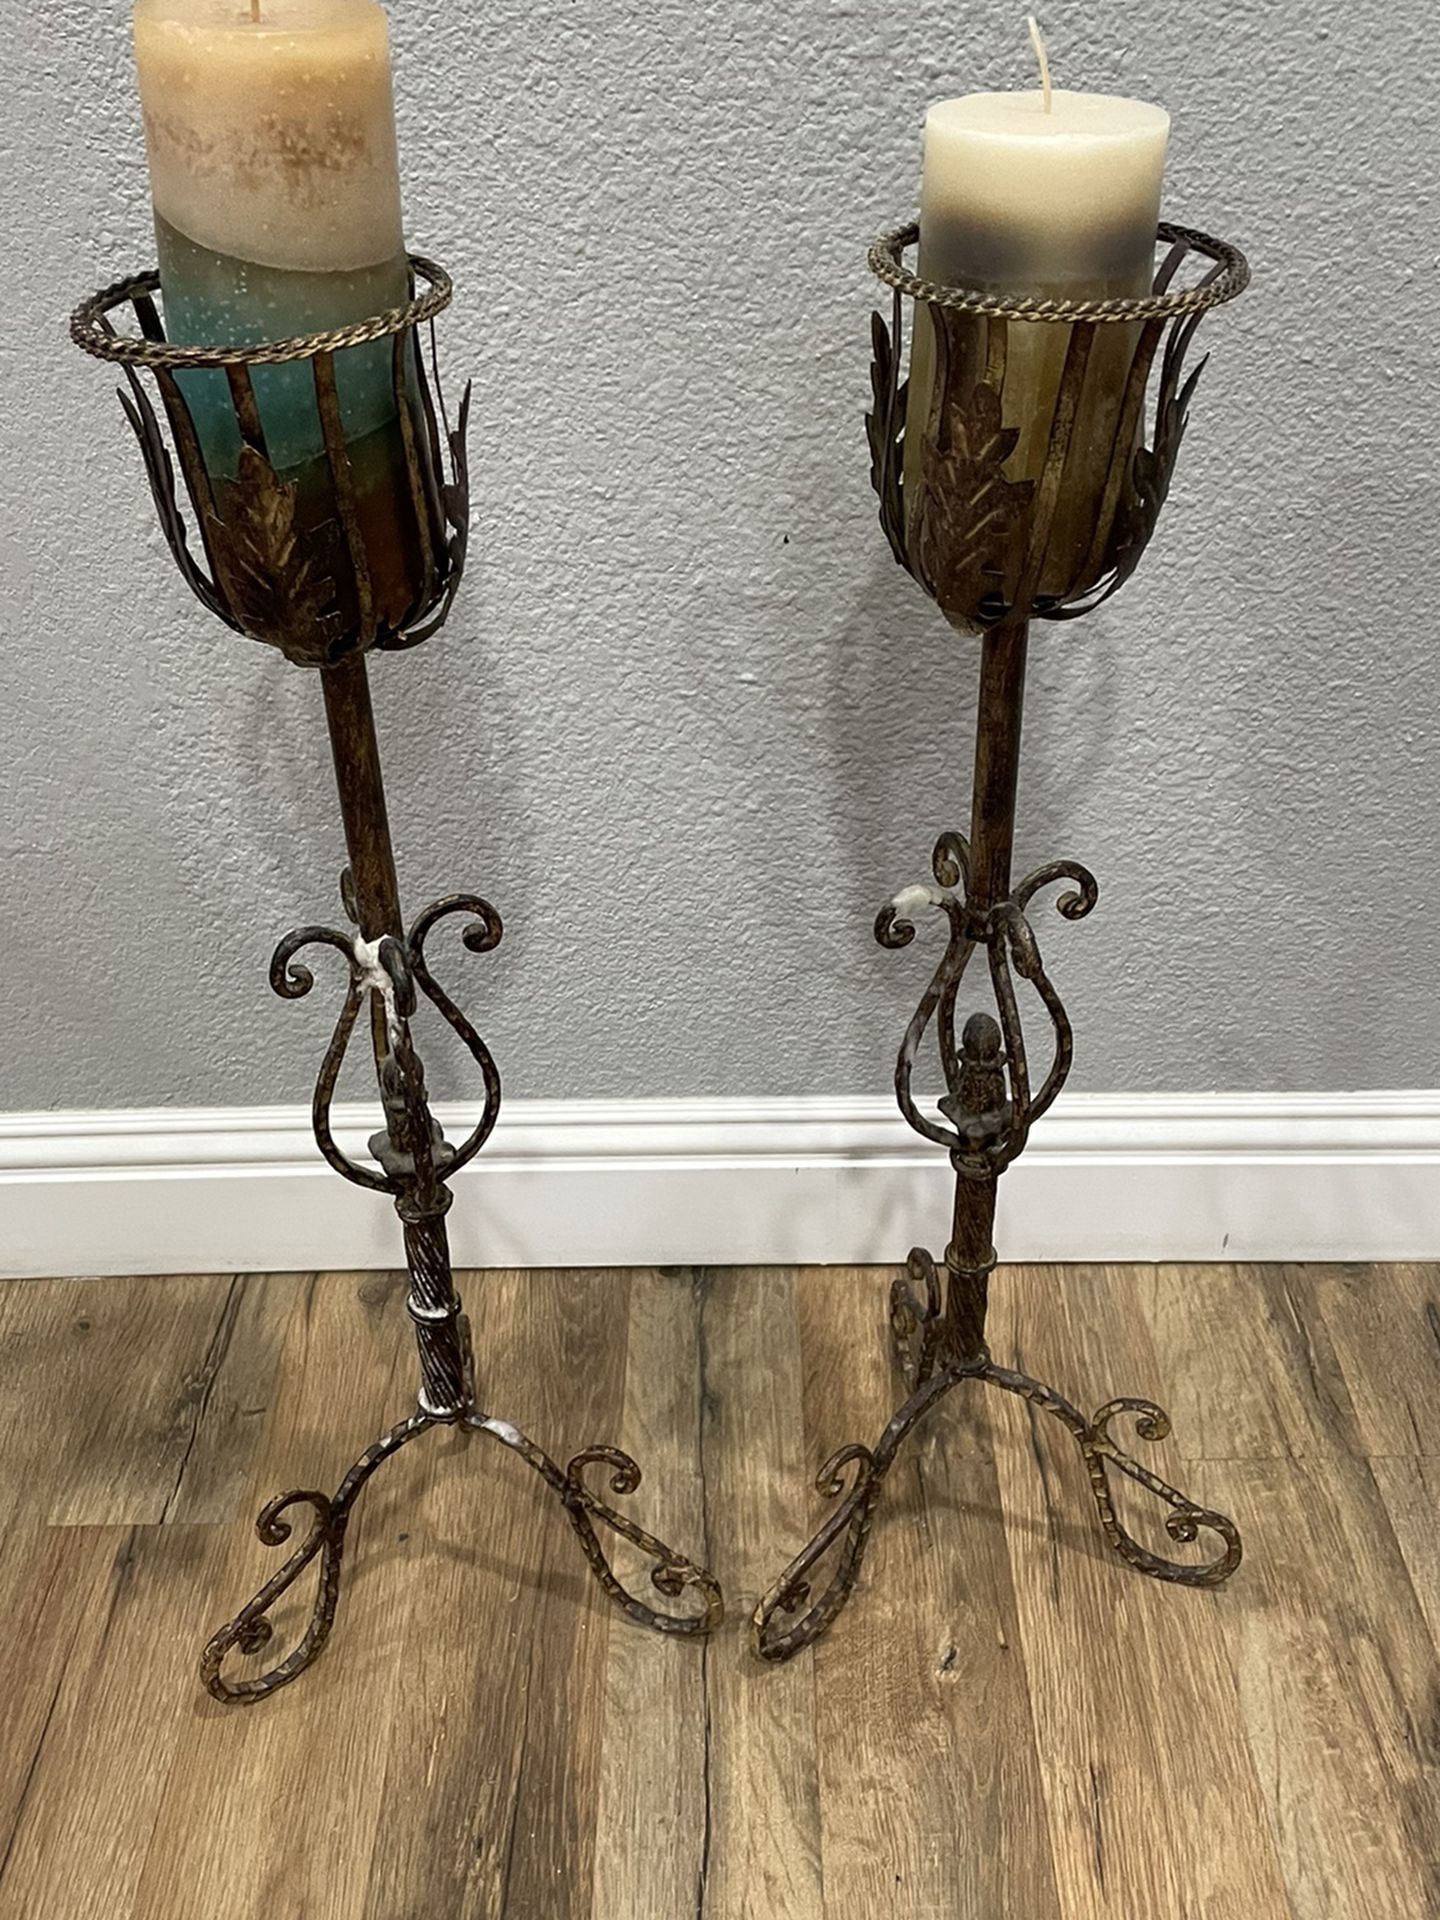 Rustic Antiqued Candle Holders